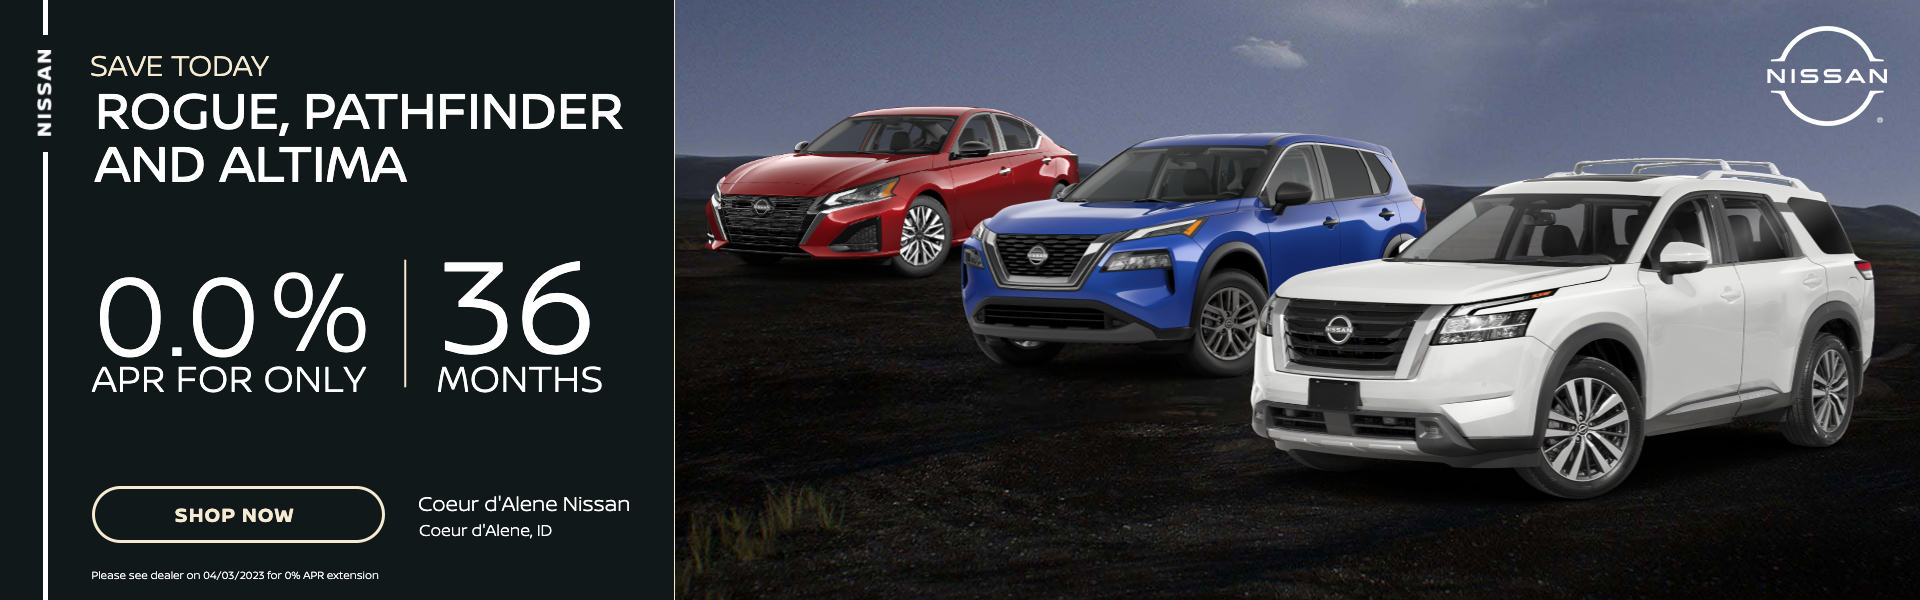 Save Today on Rogue, Pathfinder, and Altima